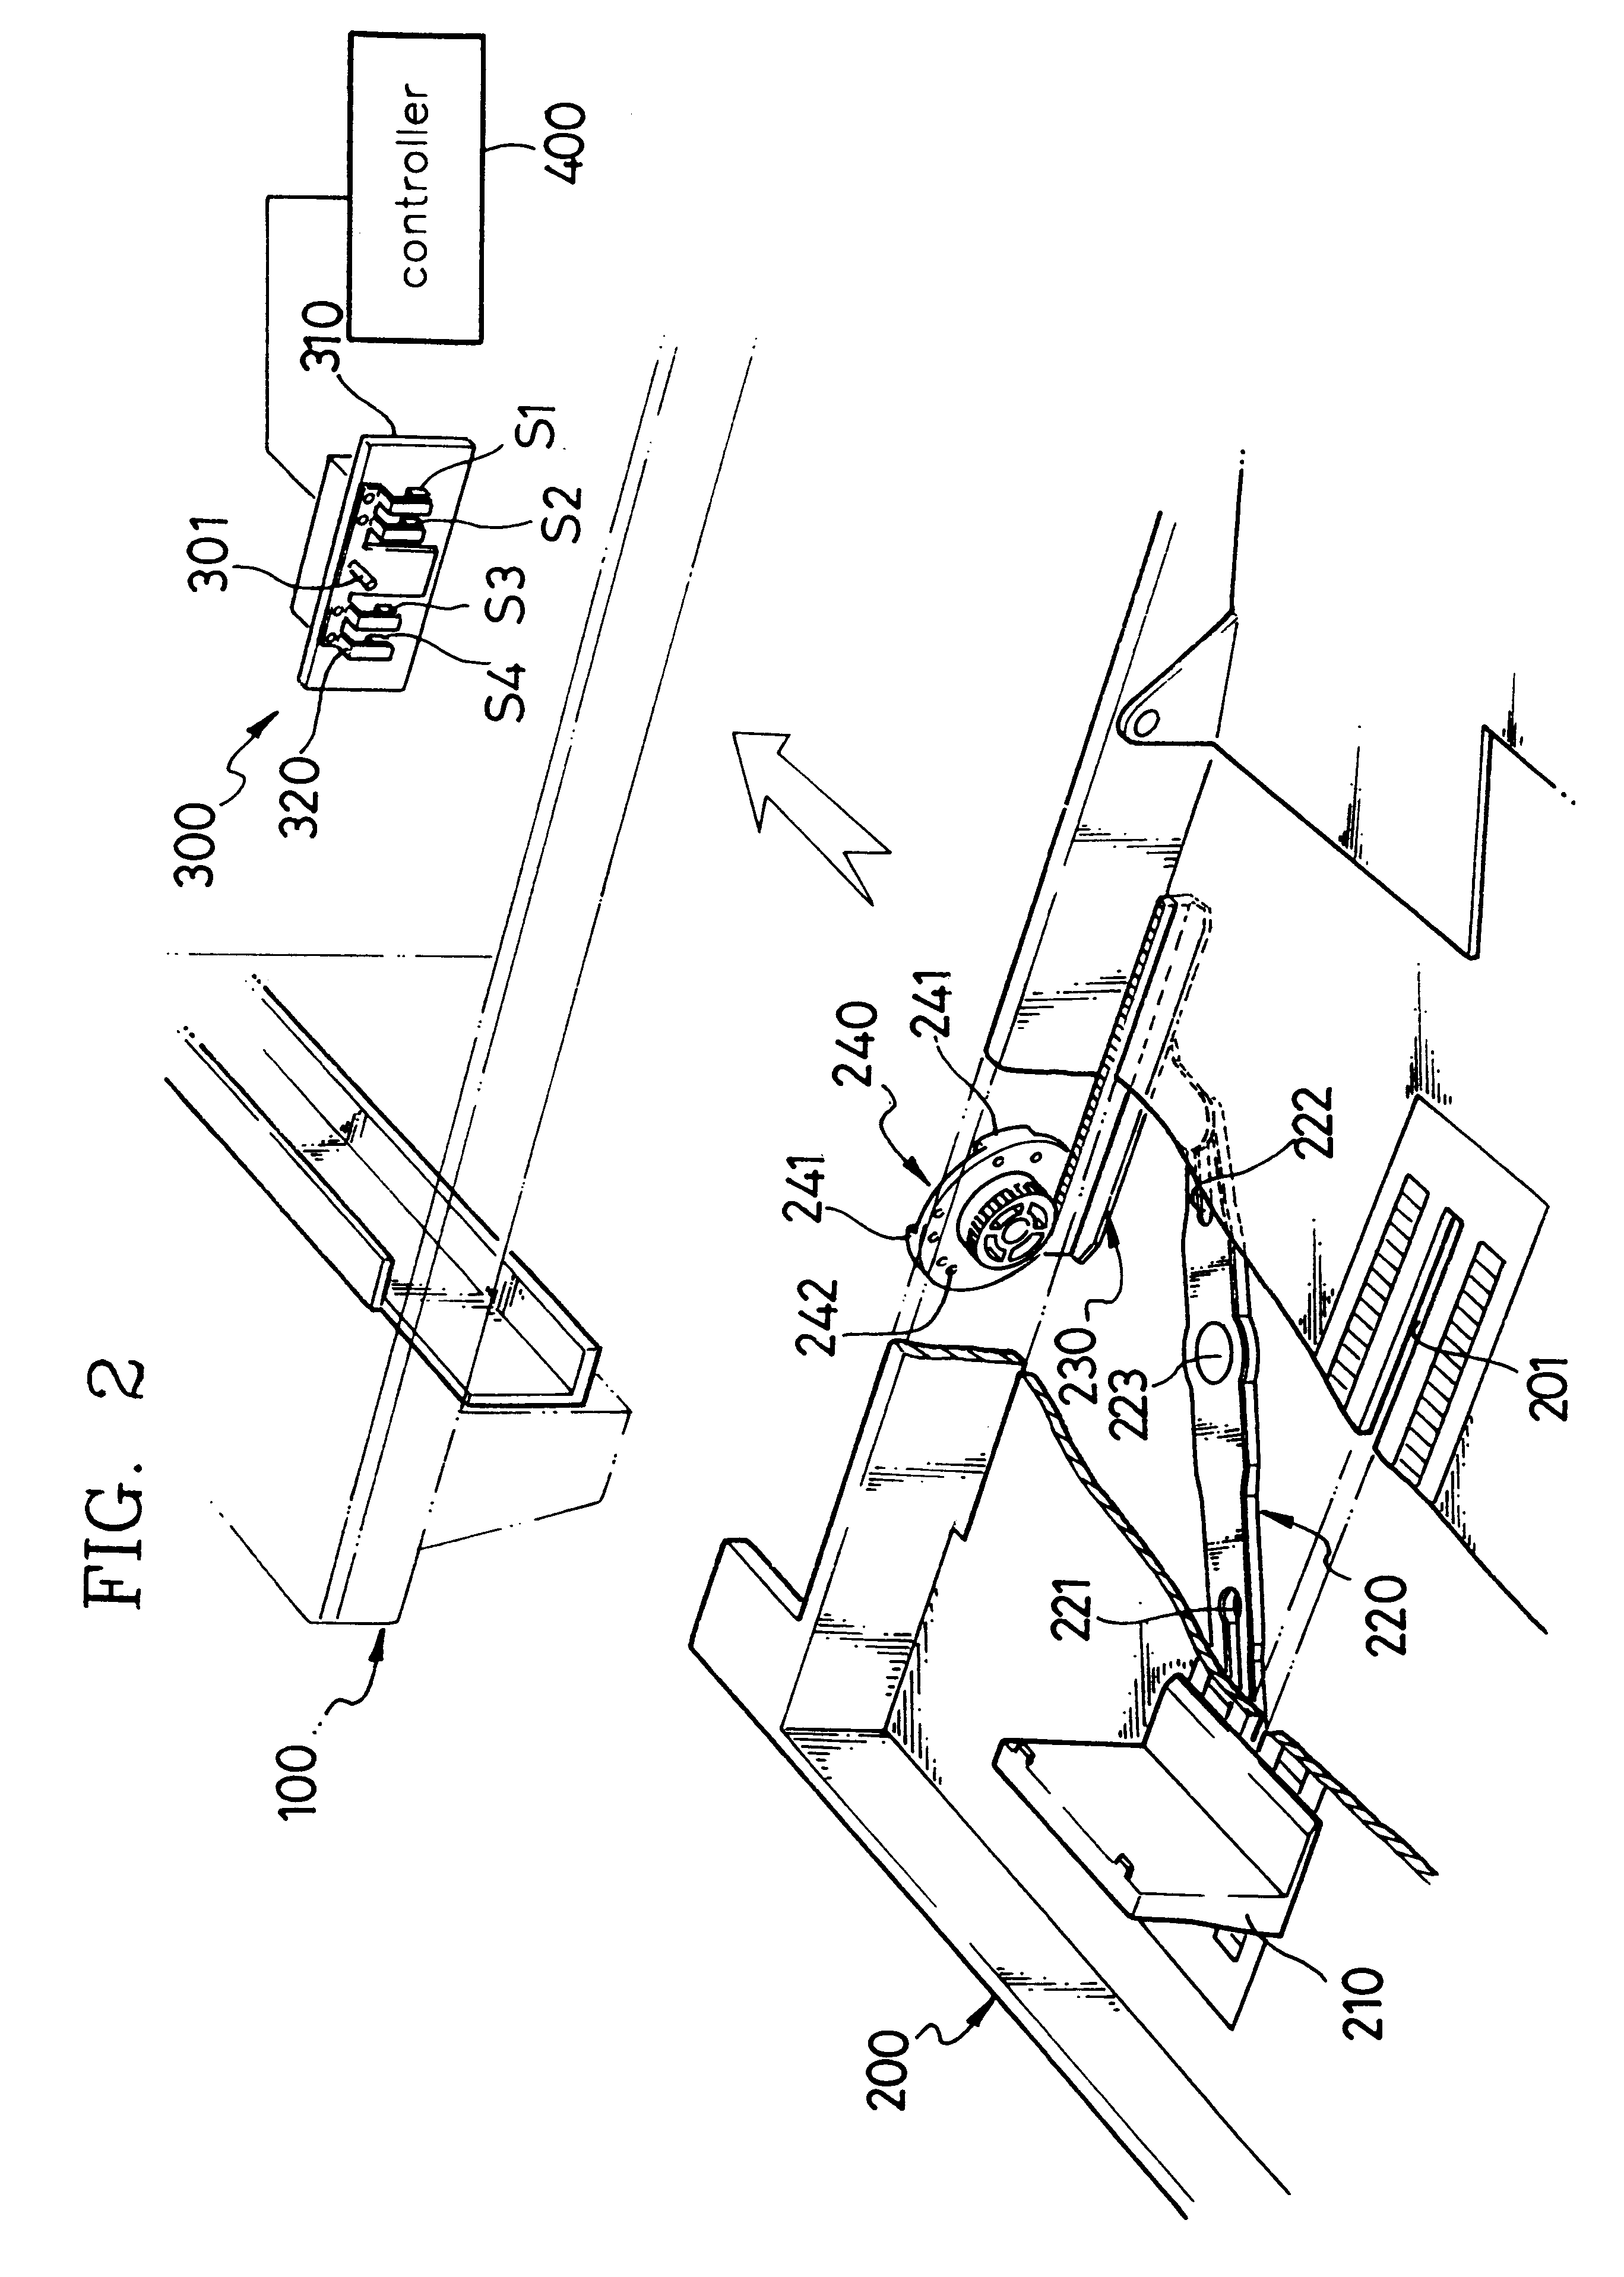 Paper feeding apparatus for printing device